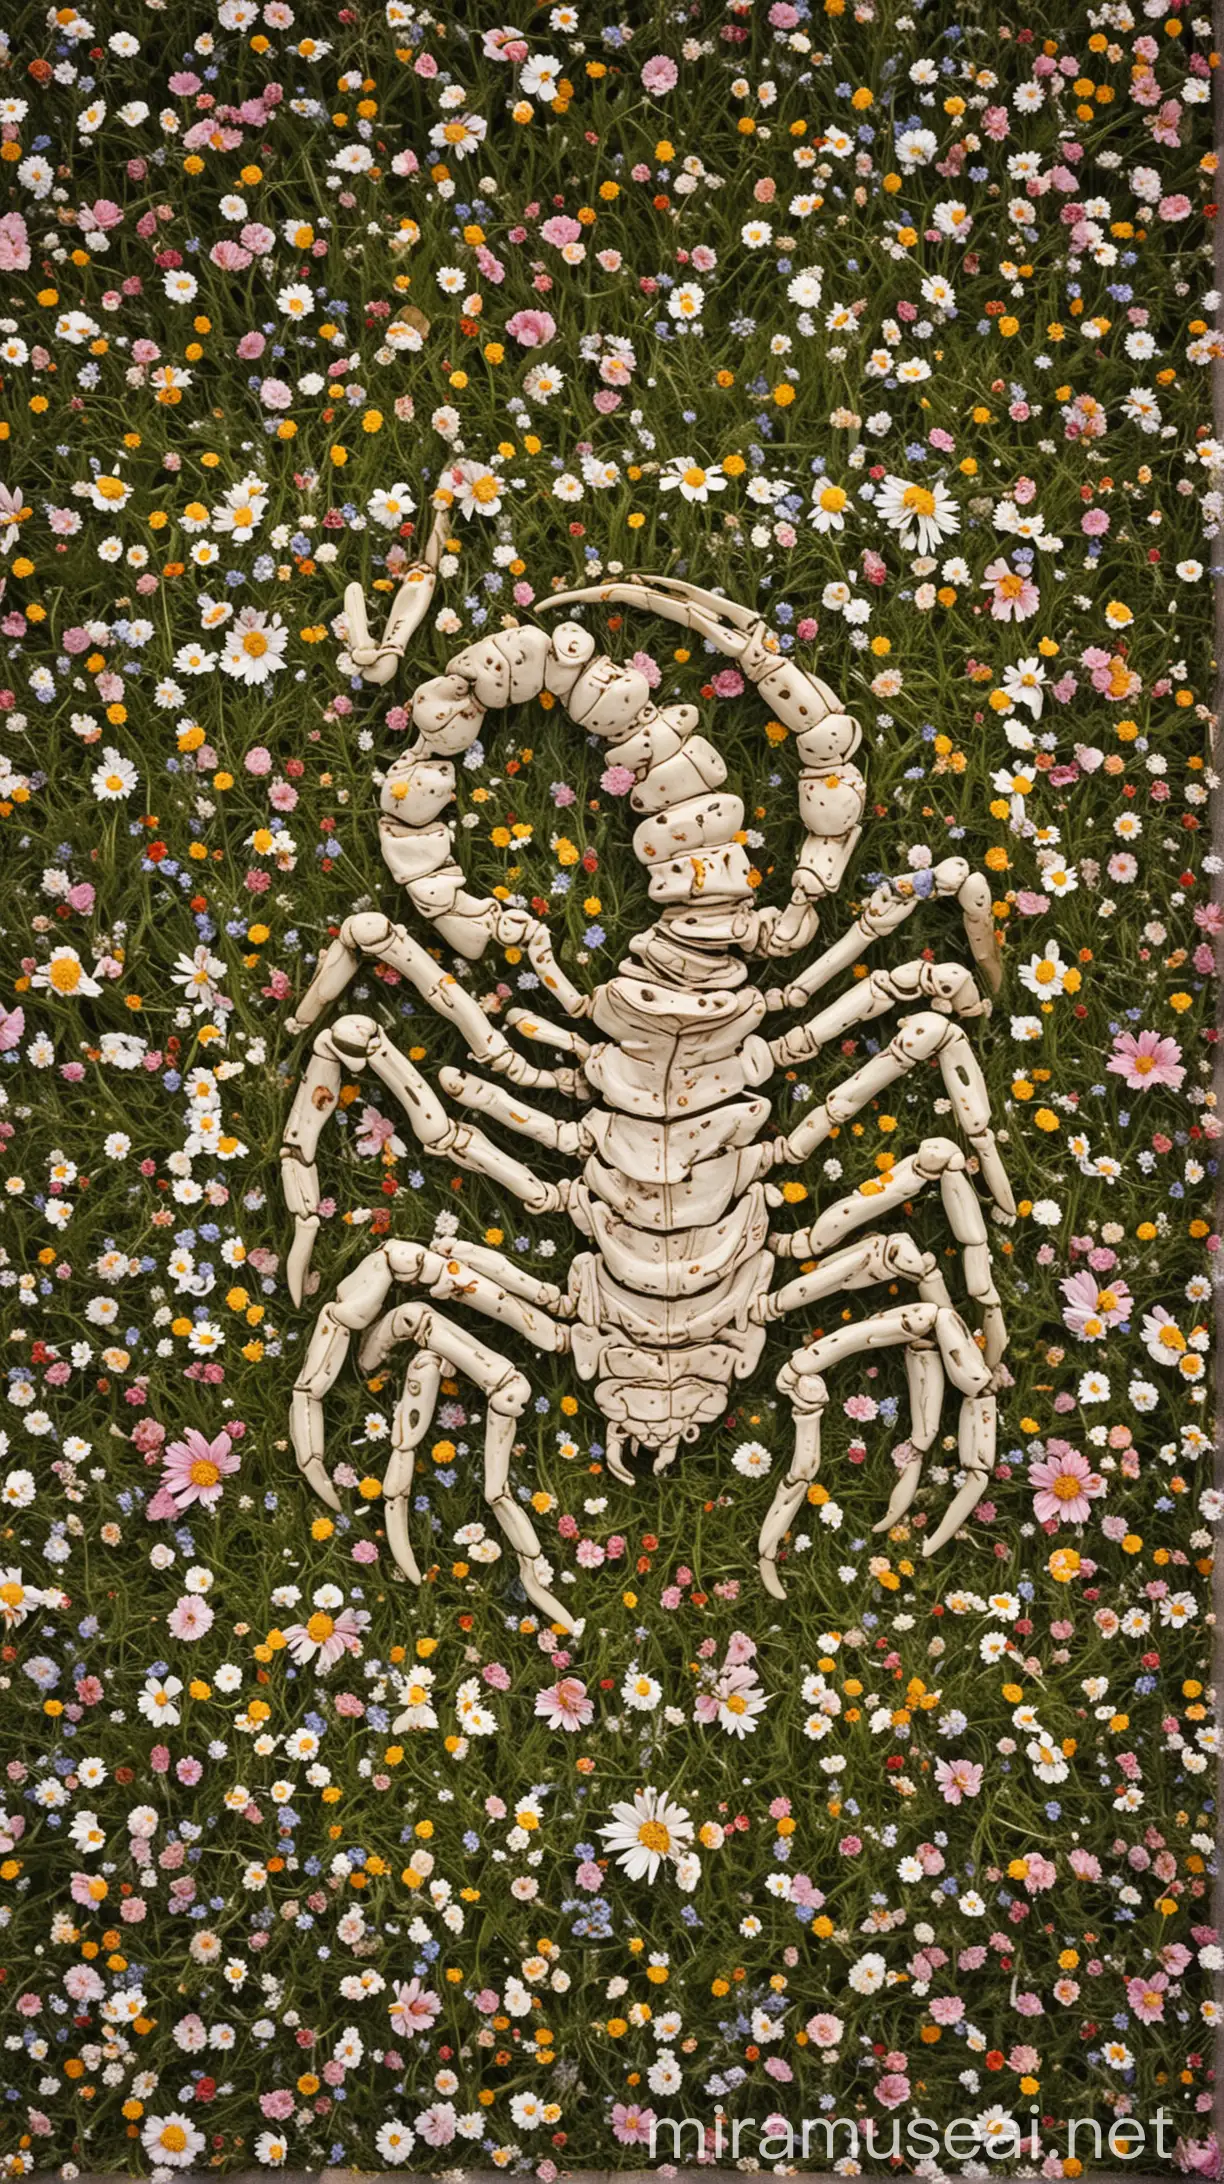 Scorpio Zodiac Sign amidst Blossoming Flowers